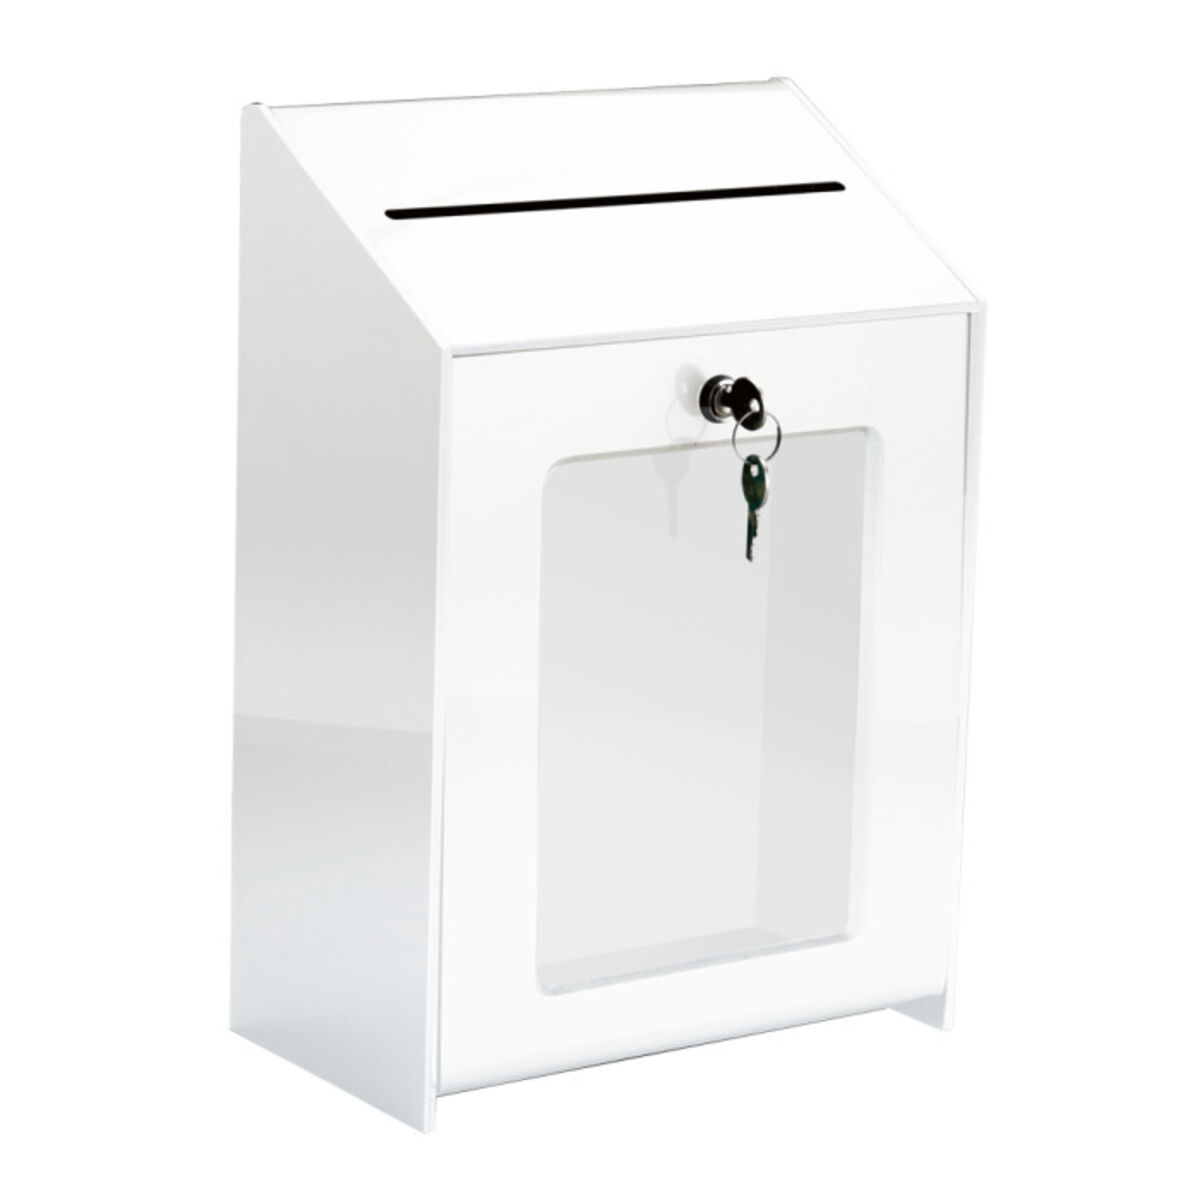 White Lockable Suggestion Box 1.png